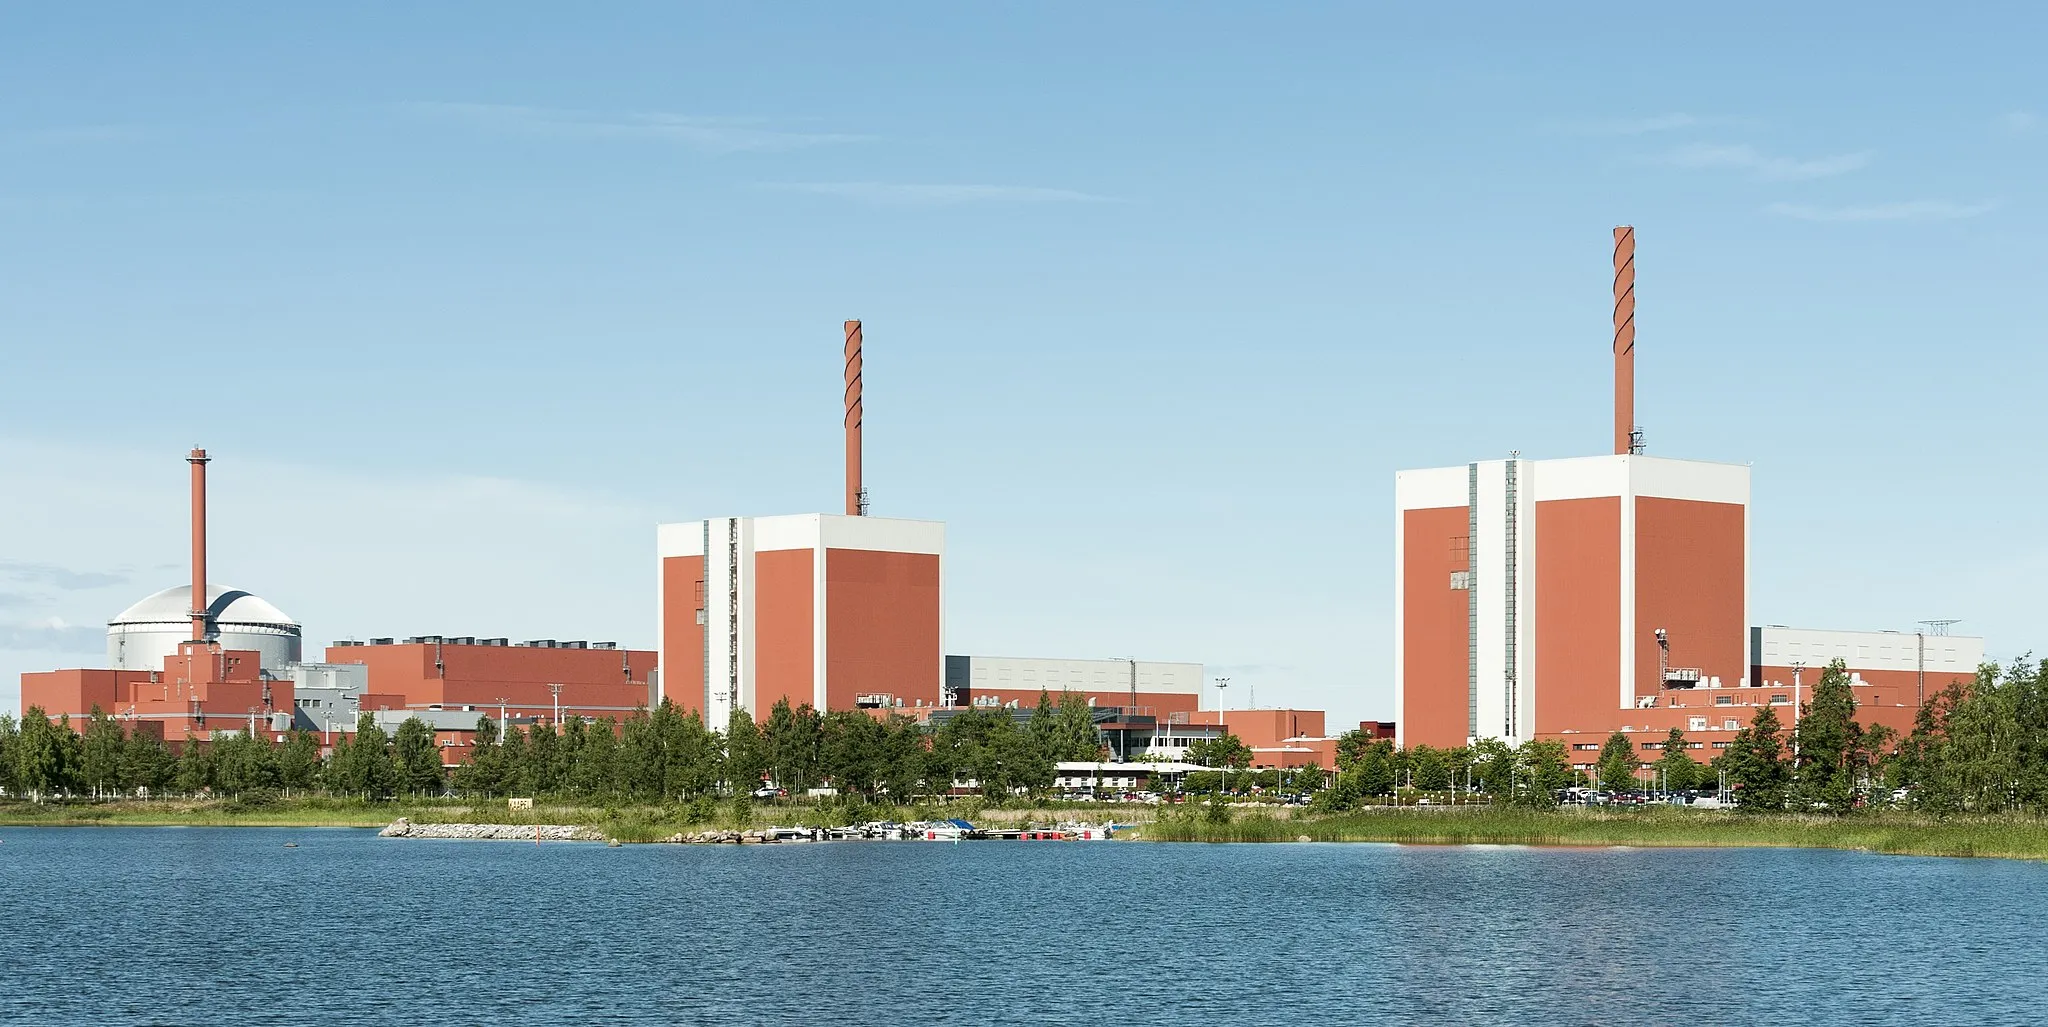 Photo showing: The three reactors of Olkiluoto Nuclear Power Plant in Eurajoki, Finland.